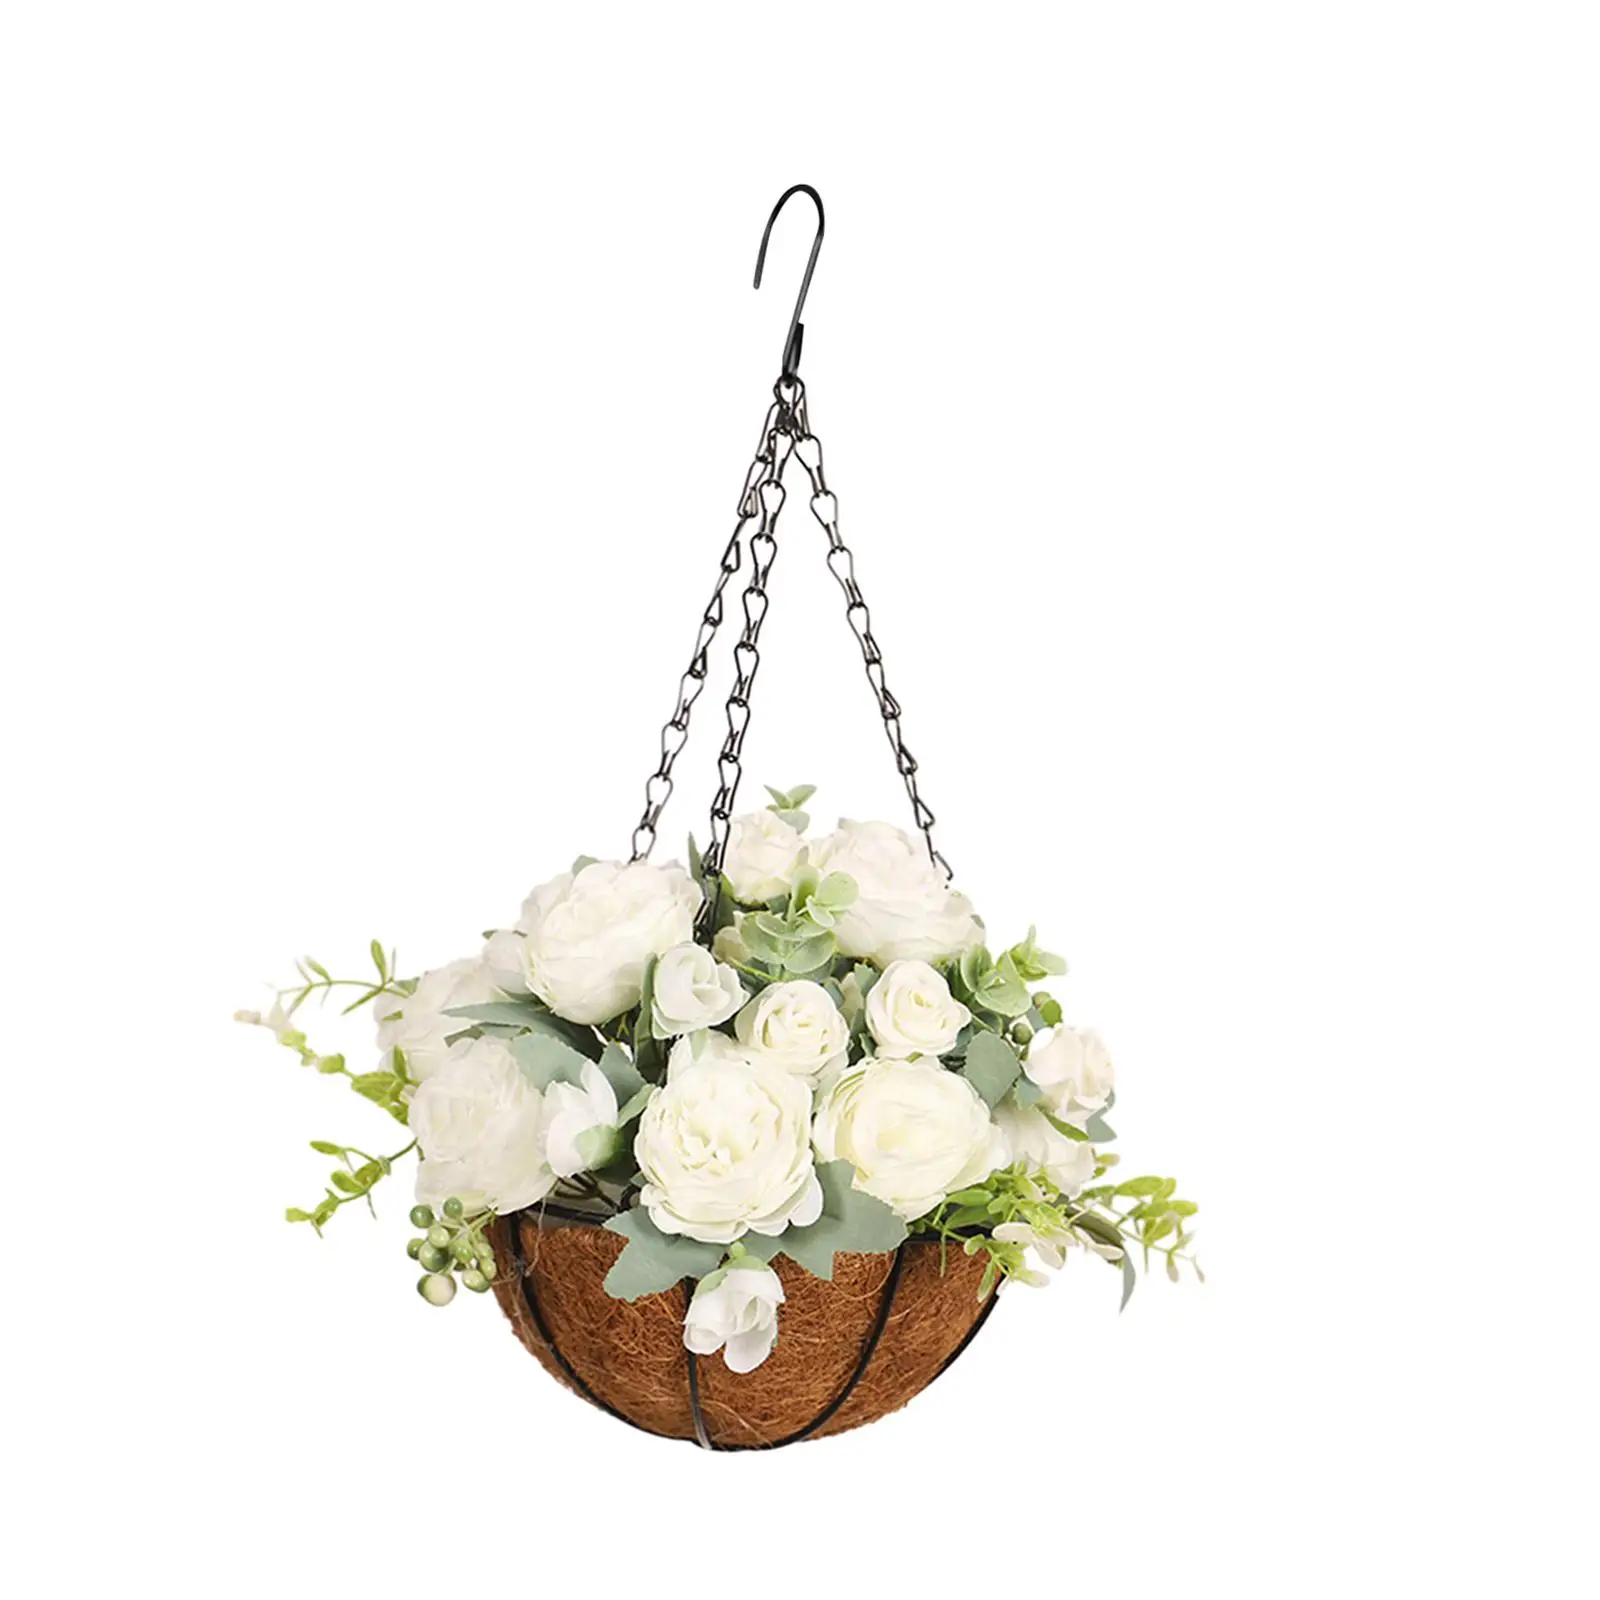 Artificial Hanging Flowers in Basket Chain Flower Pot Hanging Planter for Porch Courtyard Garden Outdoors and Indoors Patio